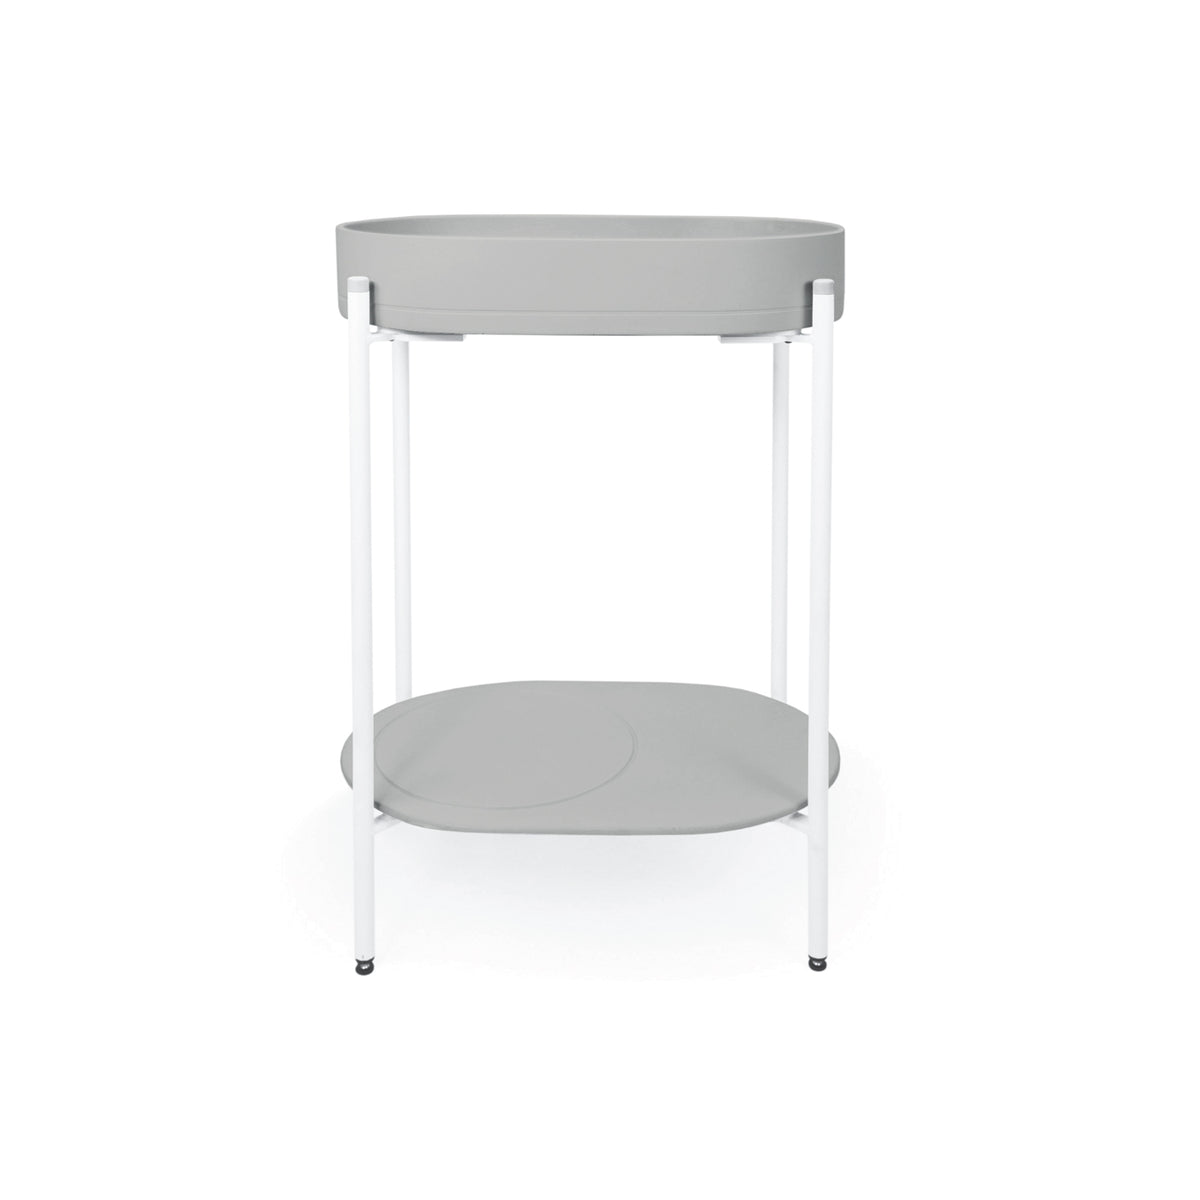 Pill Basin - Stand (Cloud,White Frame)